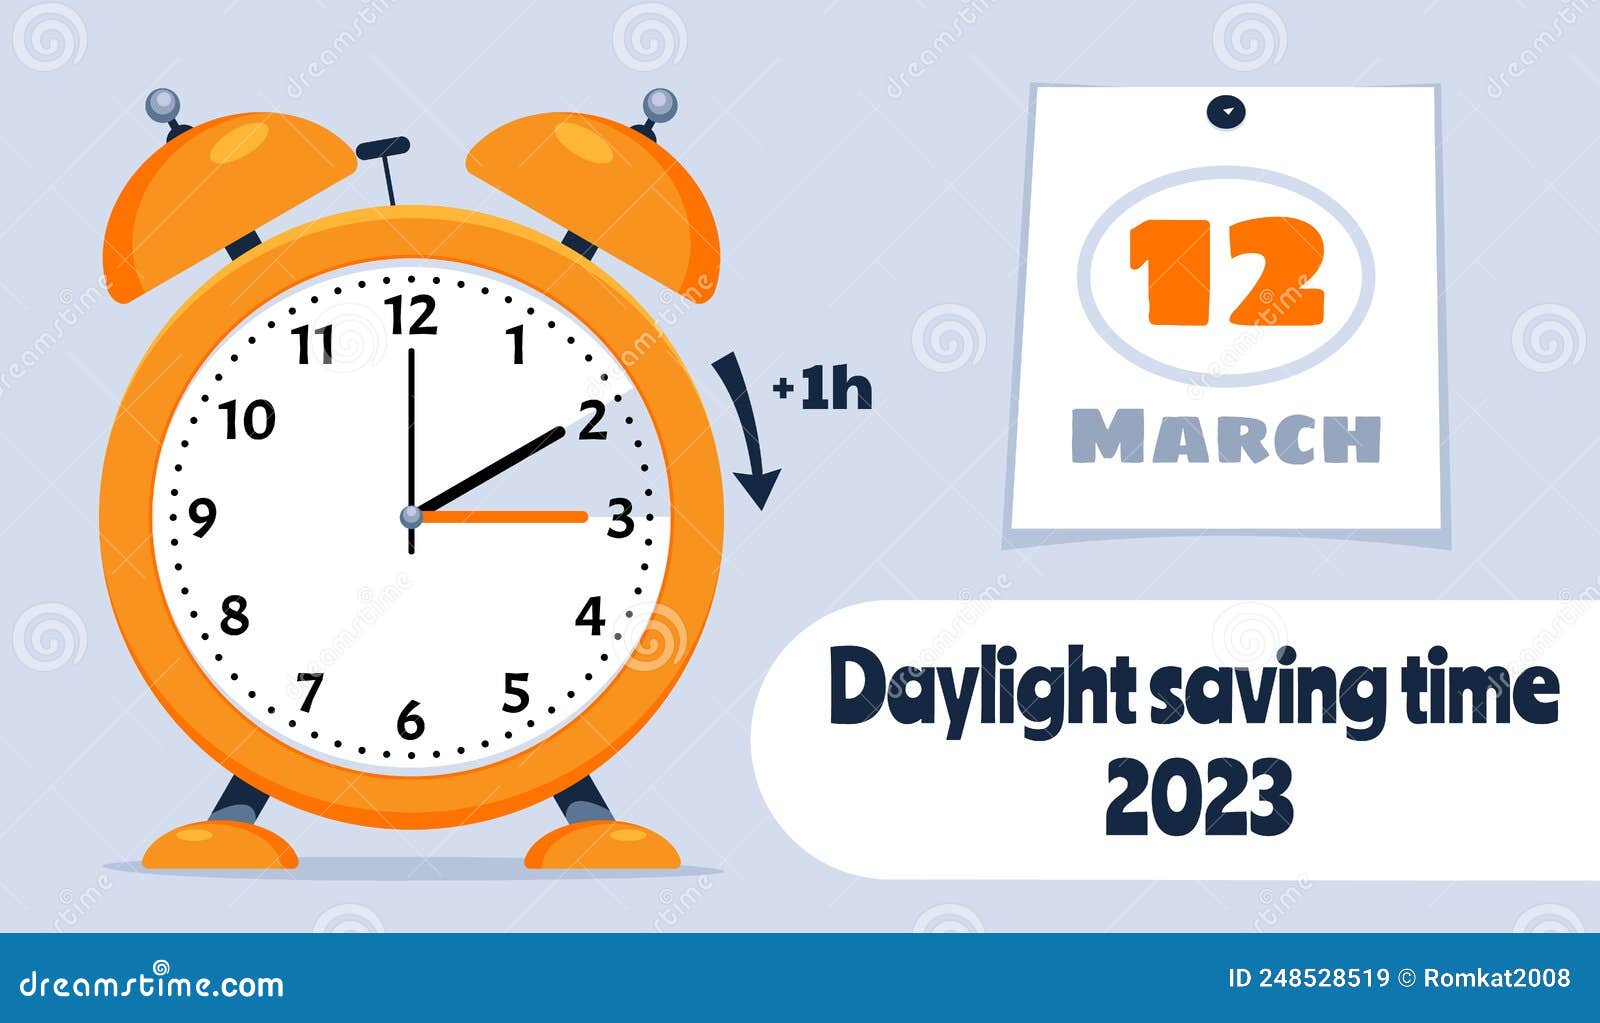 Daylight Saving Time Begins Concept. The Clocks Moves Forward One Hour